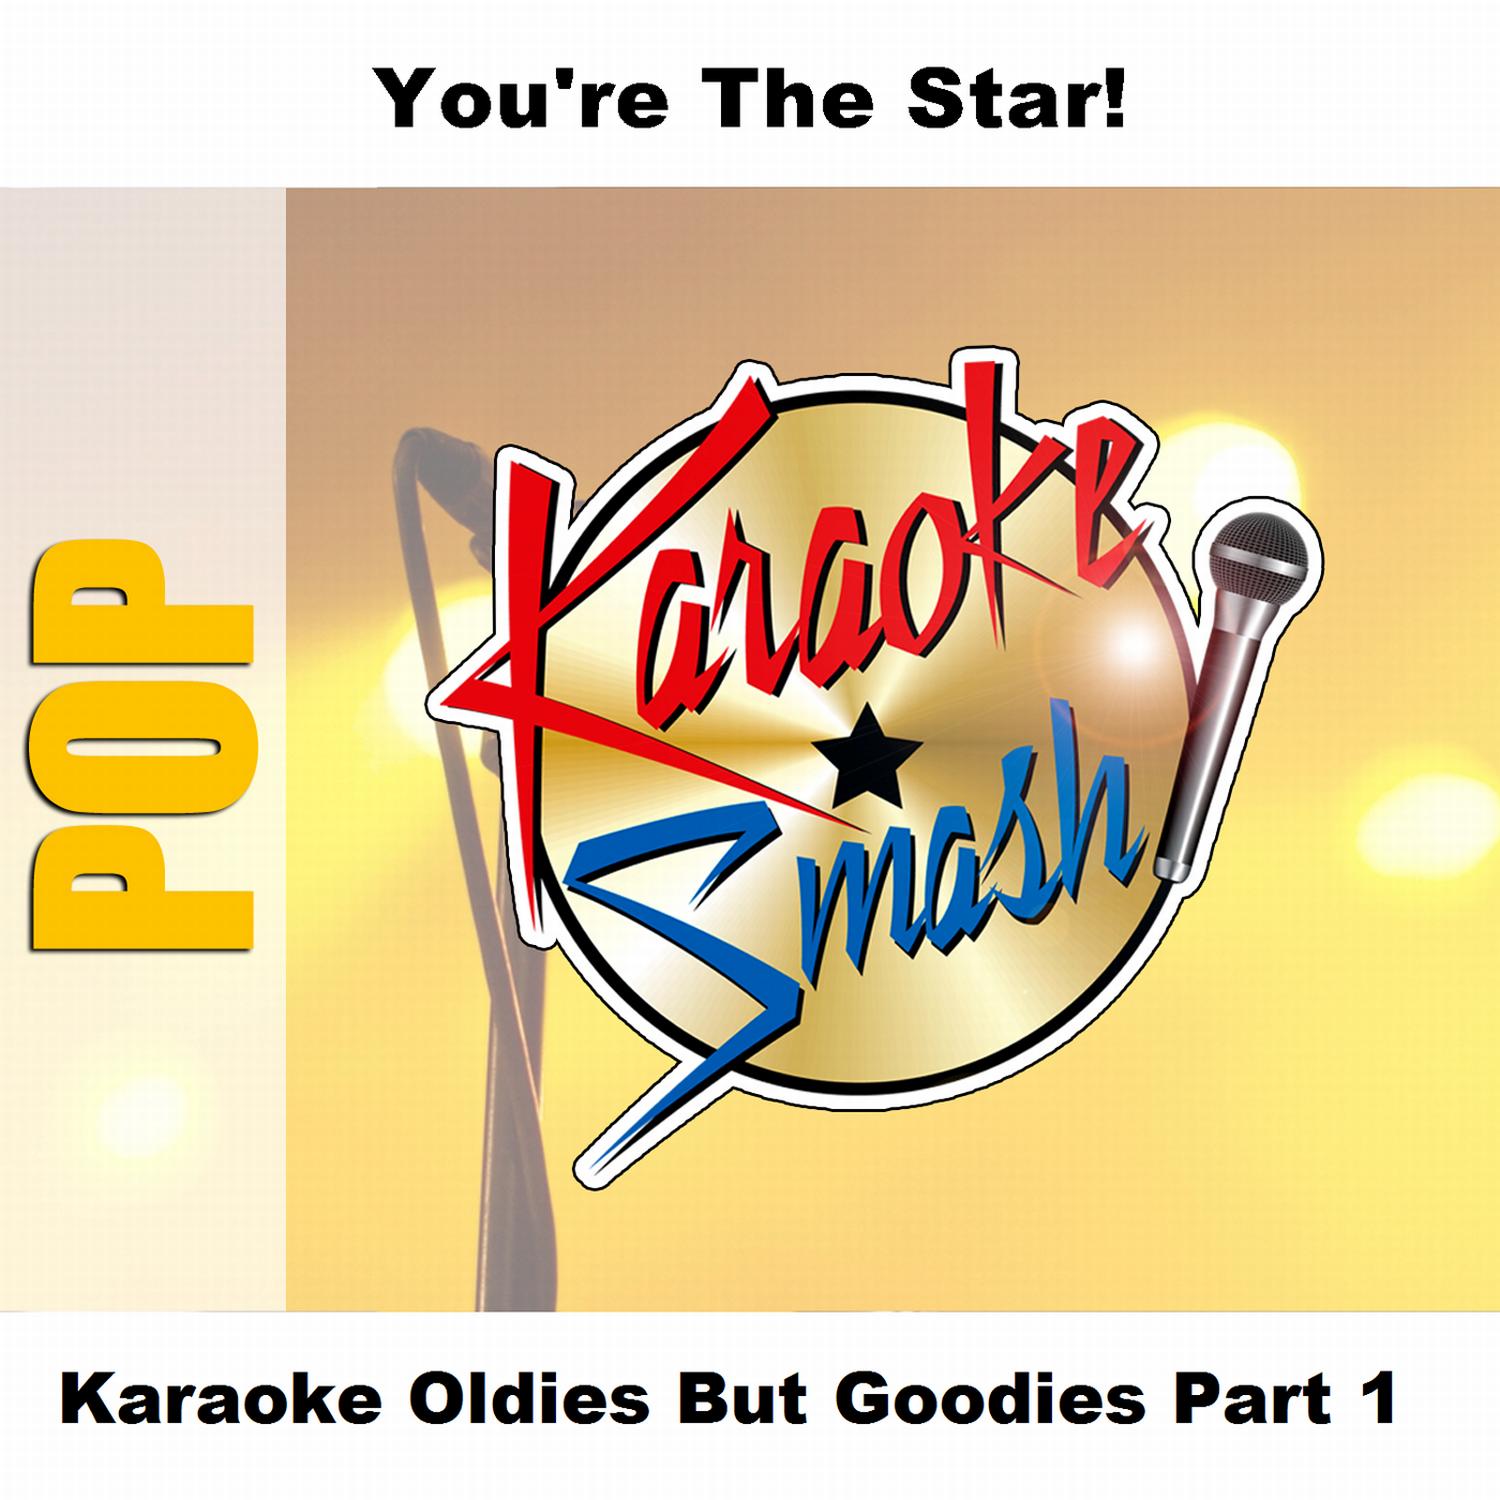 Memories Are Made From This (karaoke-version) As Made Famous By: Dean Martin